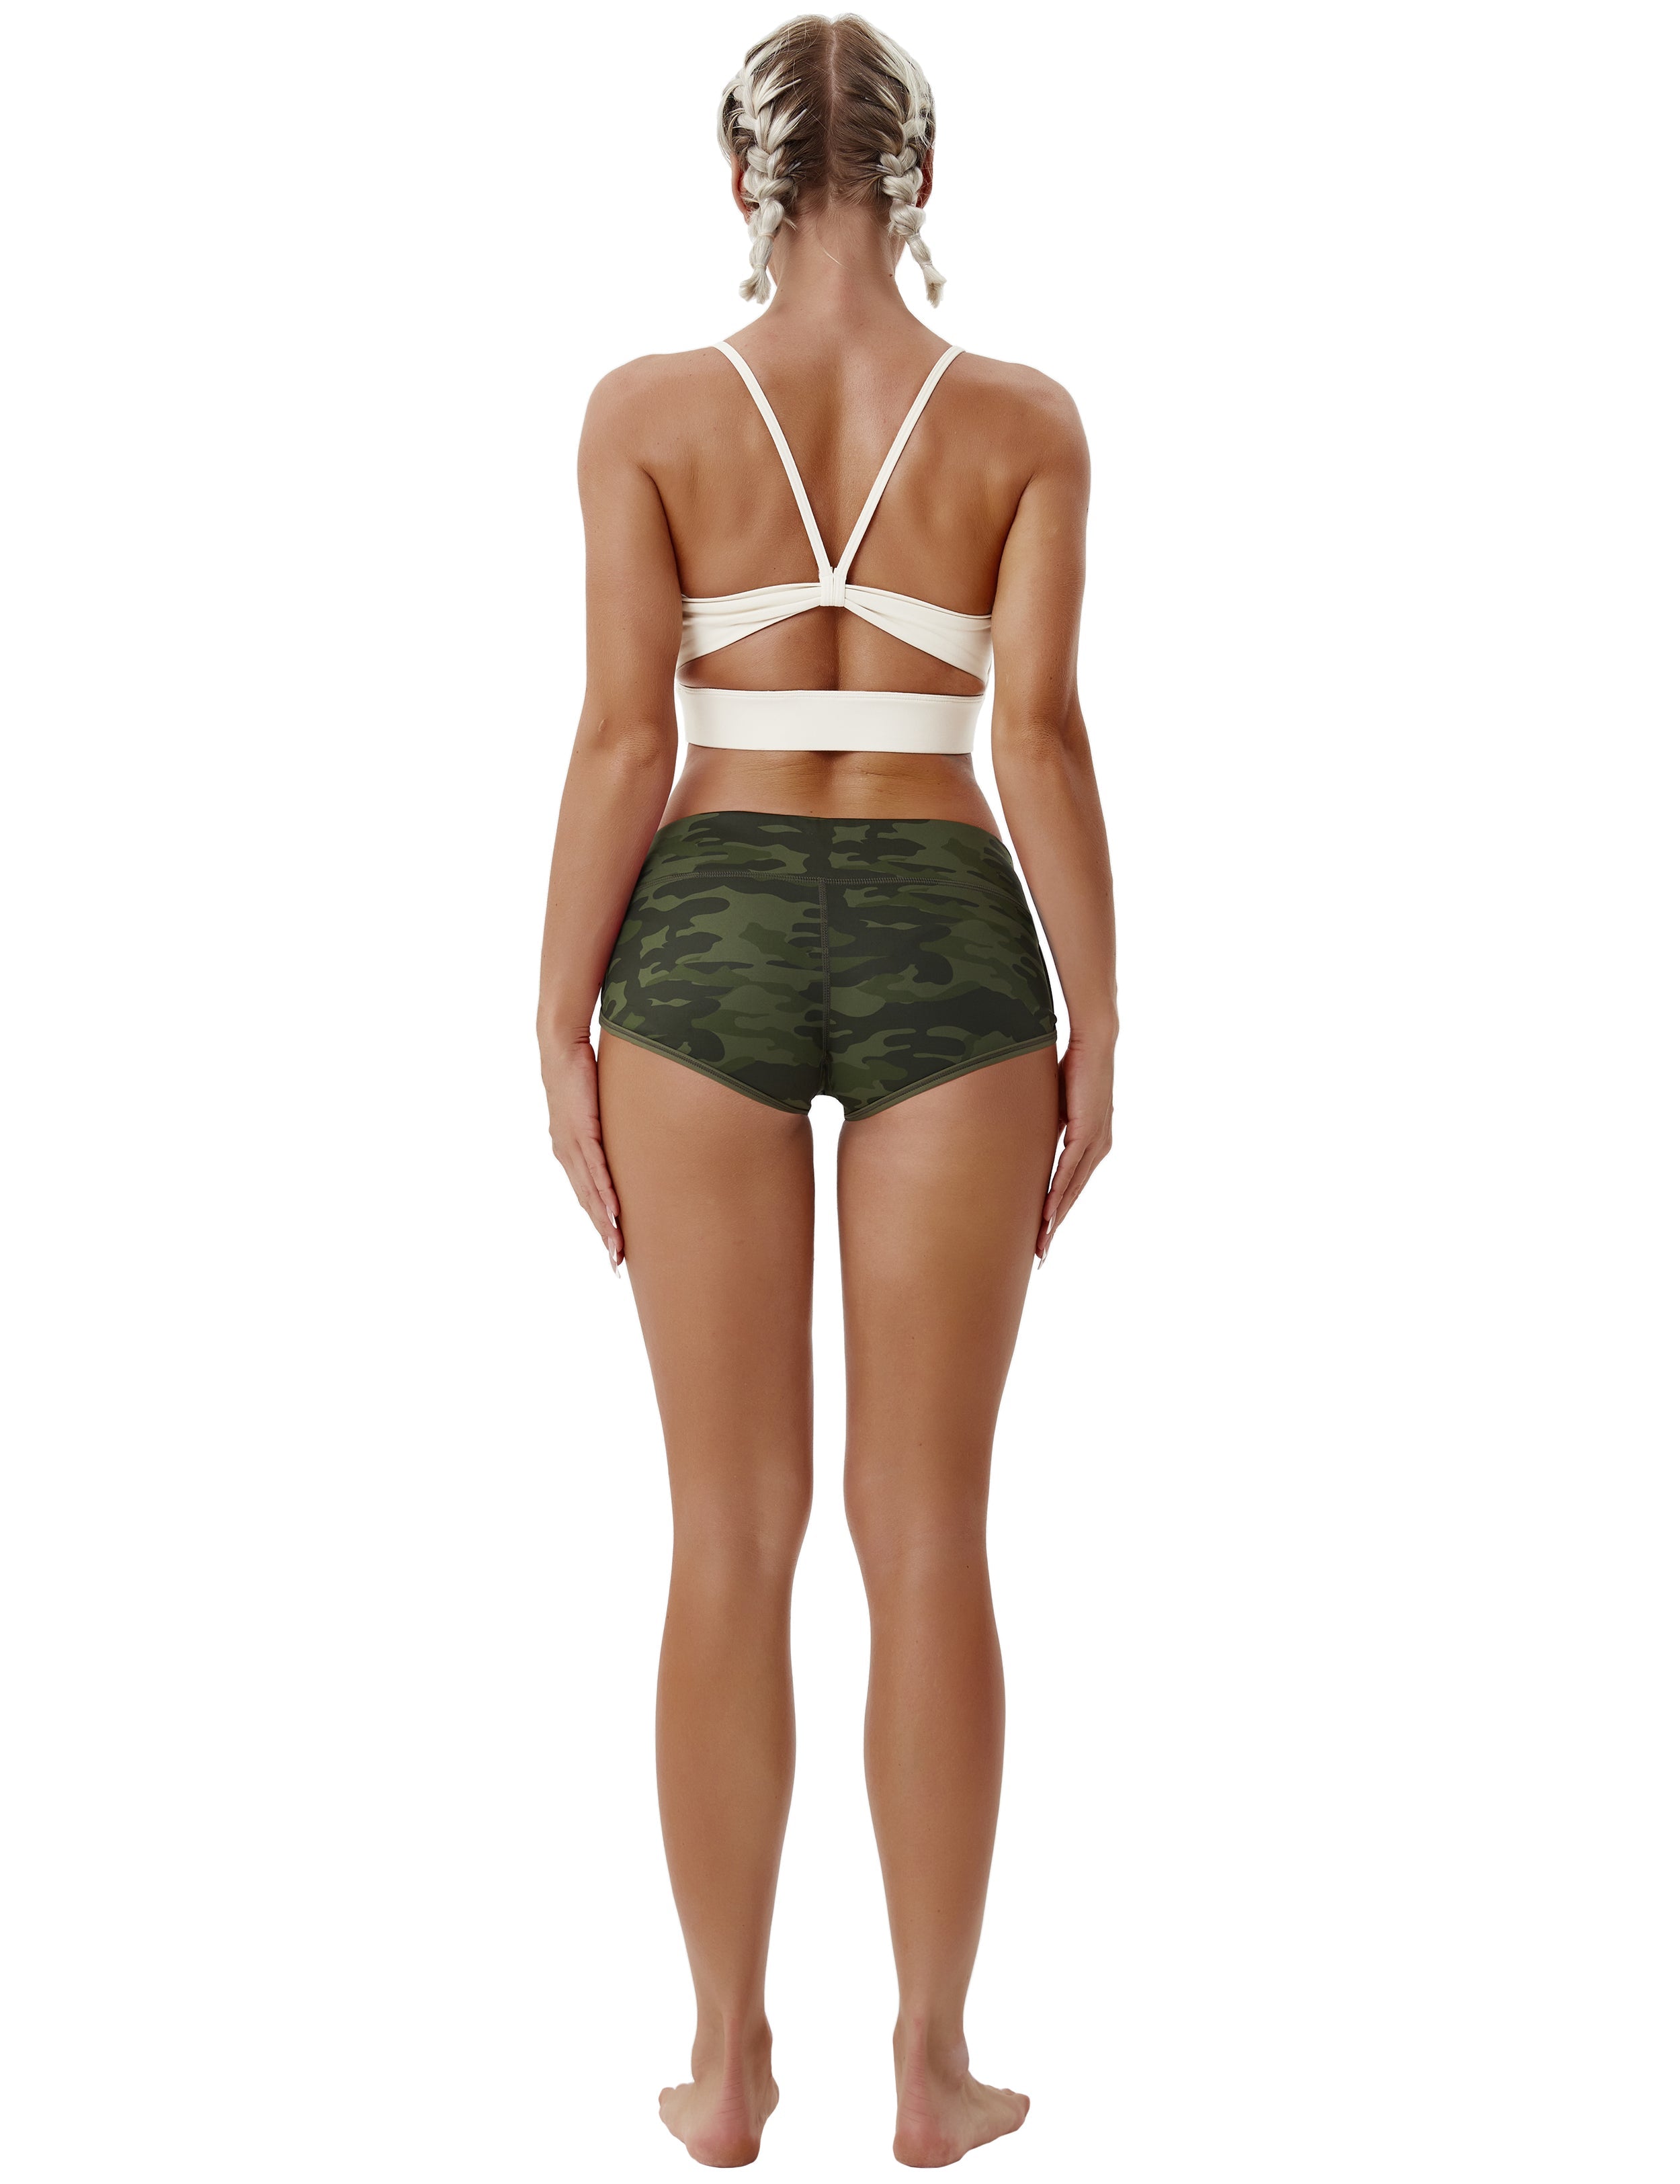 Printed Booty Yoga Shorts green camo Sleek, soft, smooth and totally comfortable: our newest sexy style is here. Softest-ever fabric High elasticity High density 4-way stretch Fabric doesn't attract lint easily No see-through Moisture-wicking Machine wash 78% Polyester, 22% Spandex